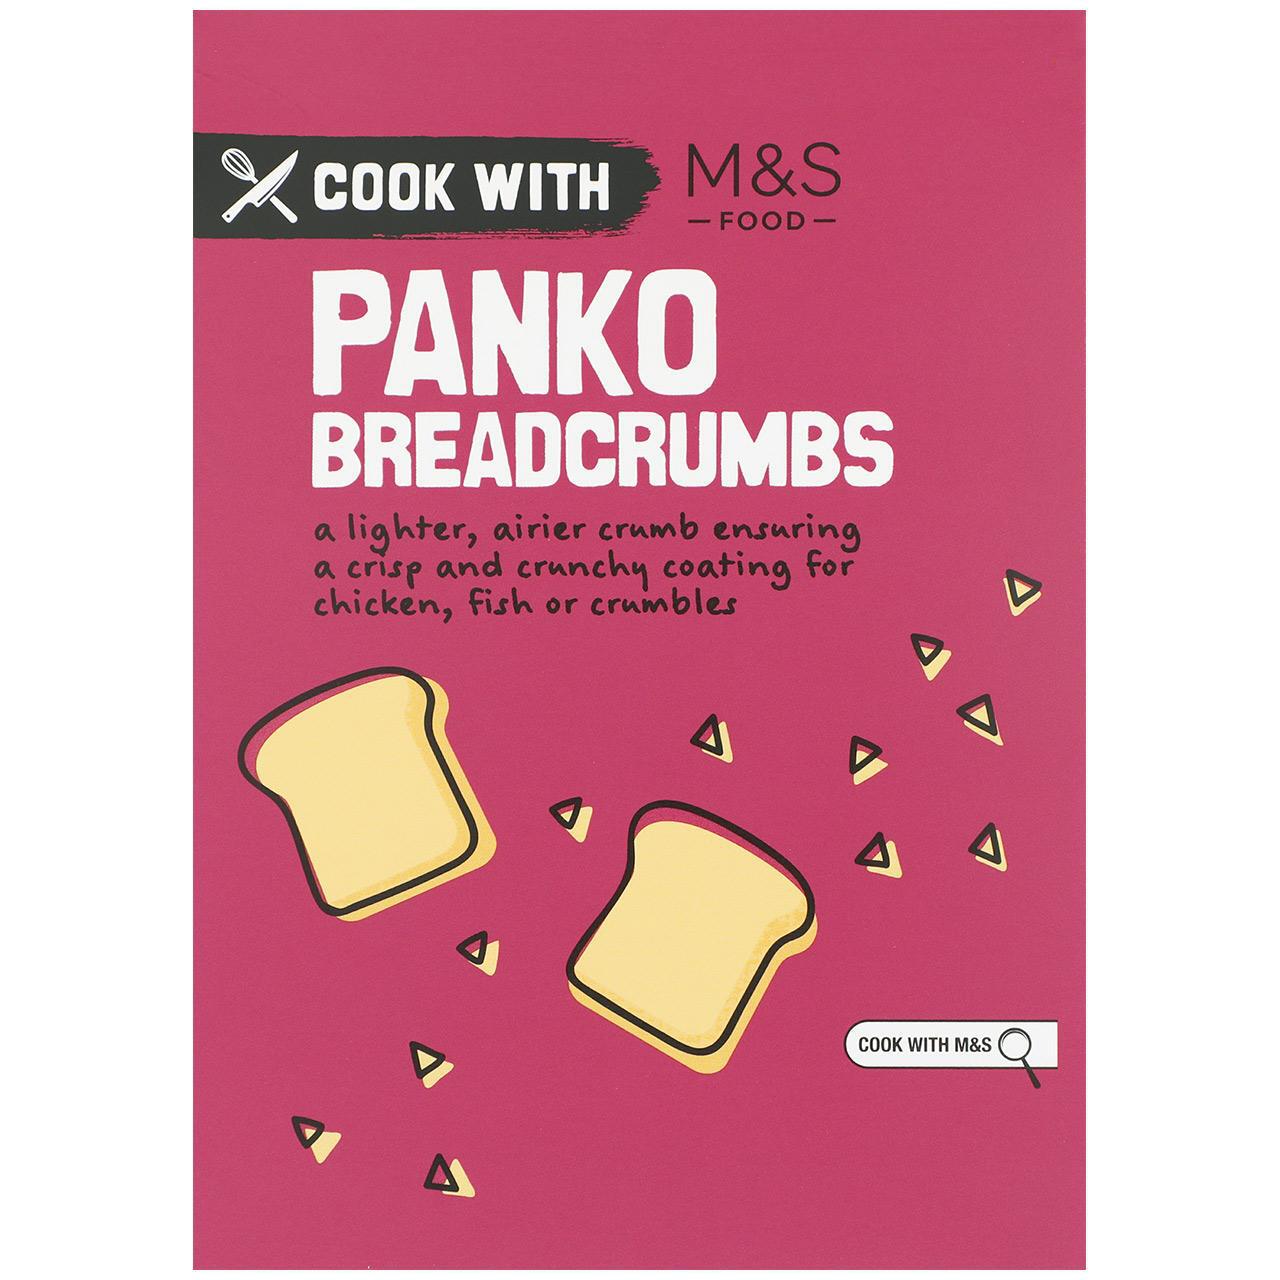 Cook With M&S Panko Breadcrumbs 150g